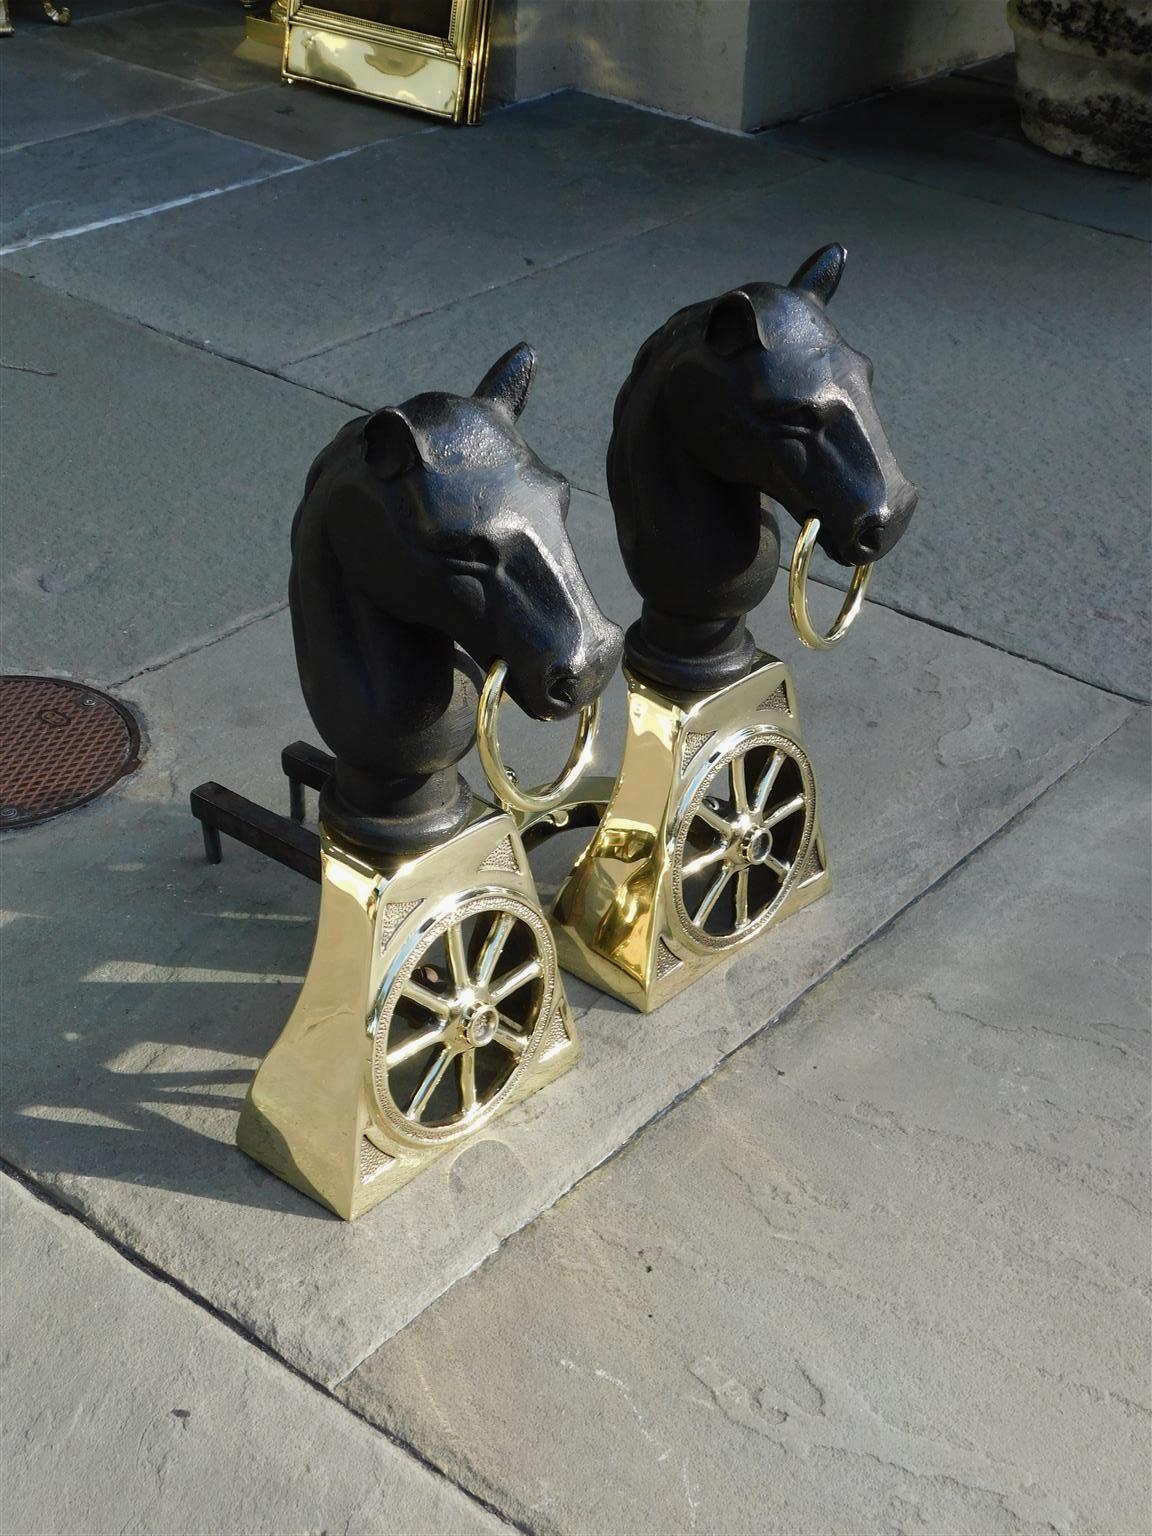 Pair of American brass and cast iron horse head wagon wheel andirons with flanking ball finial log stops, mid 19th century.